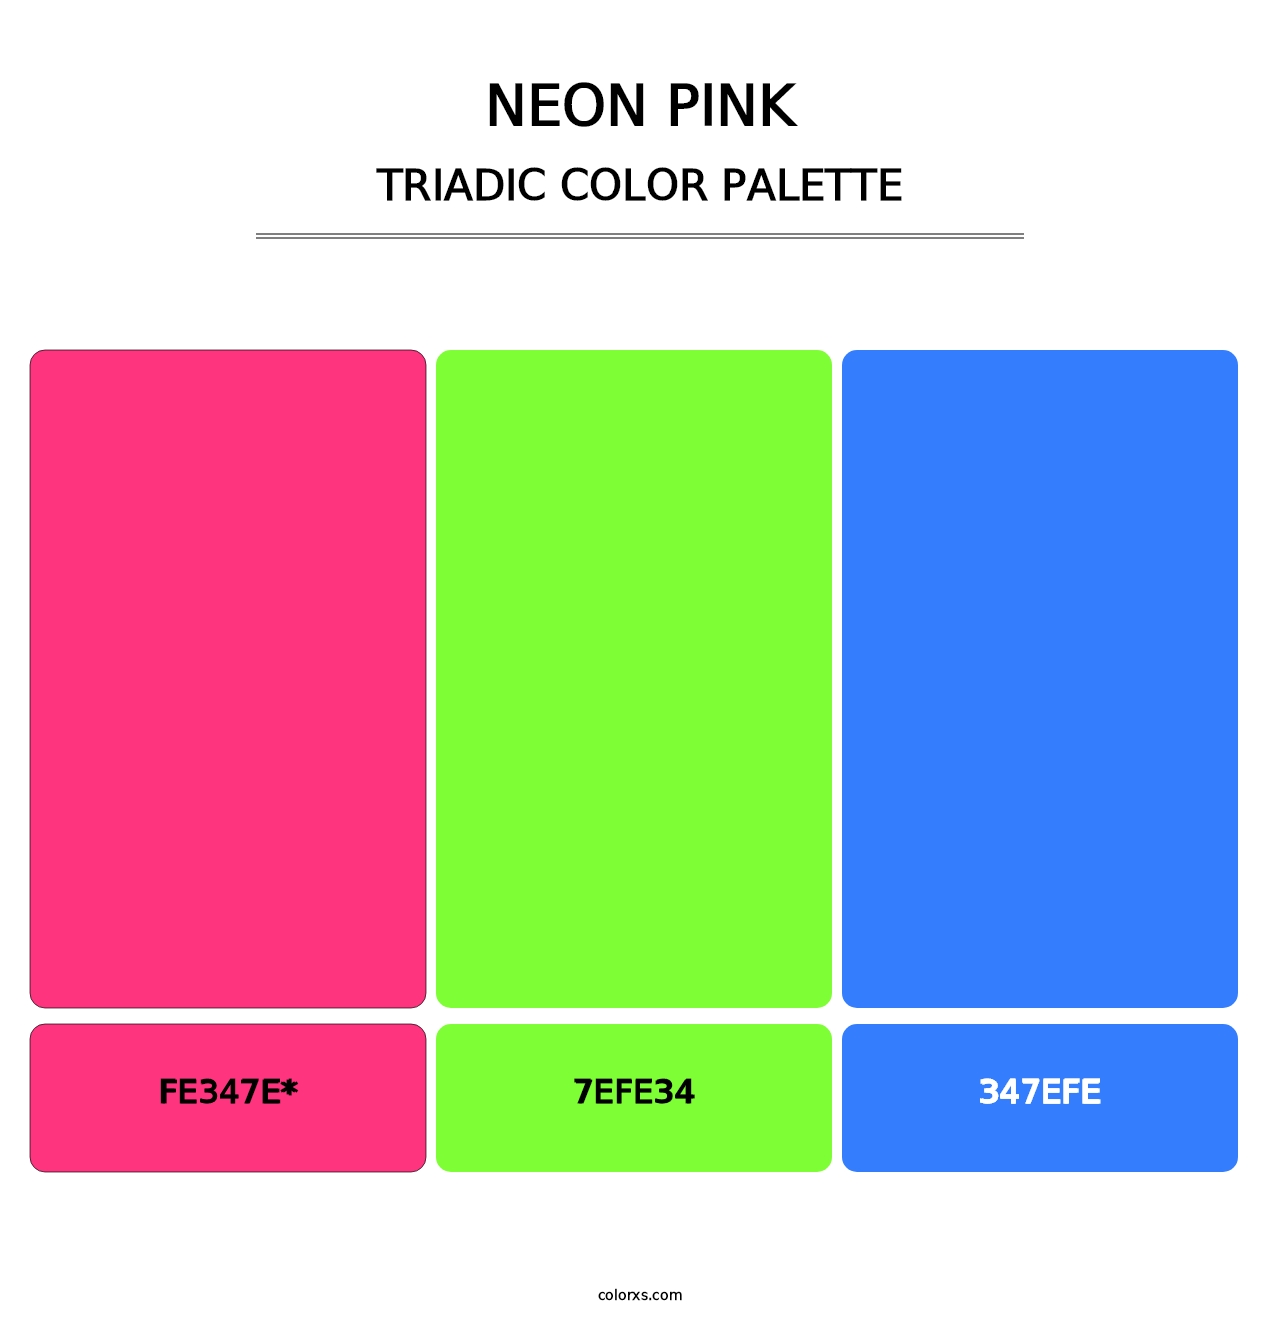 Neon Pink - Triadic Color Palette